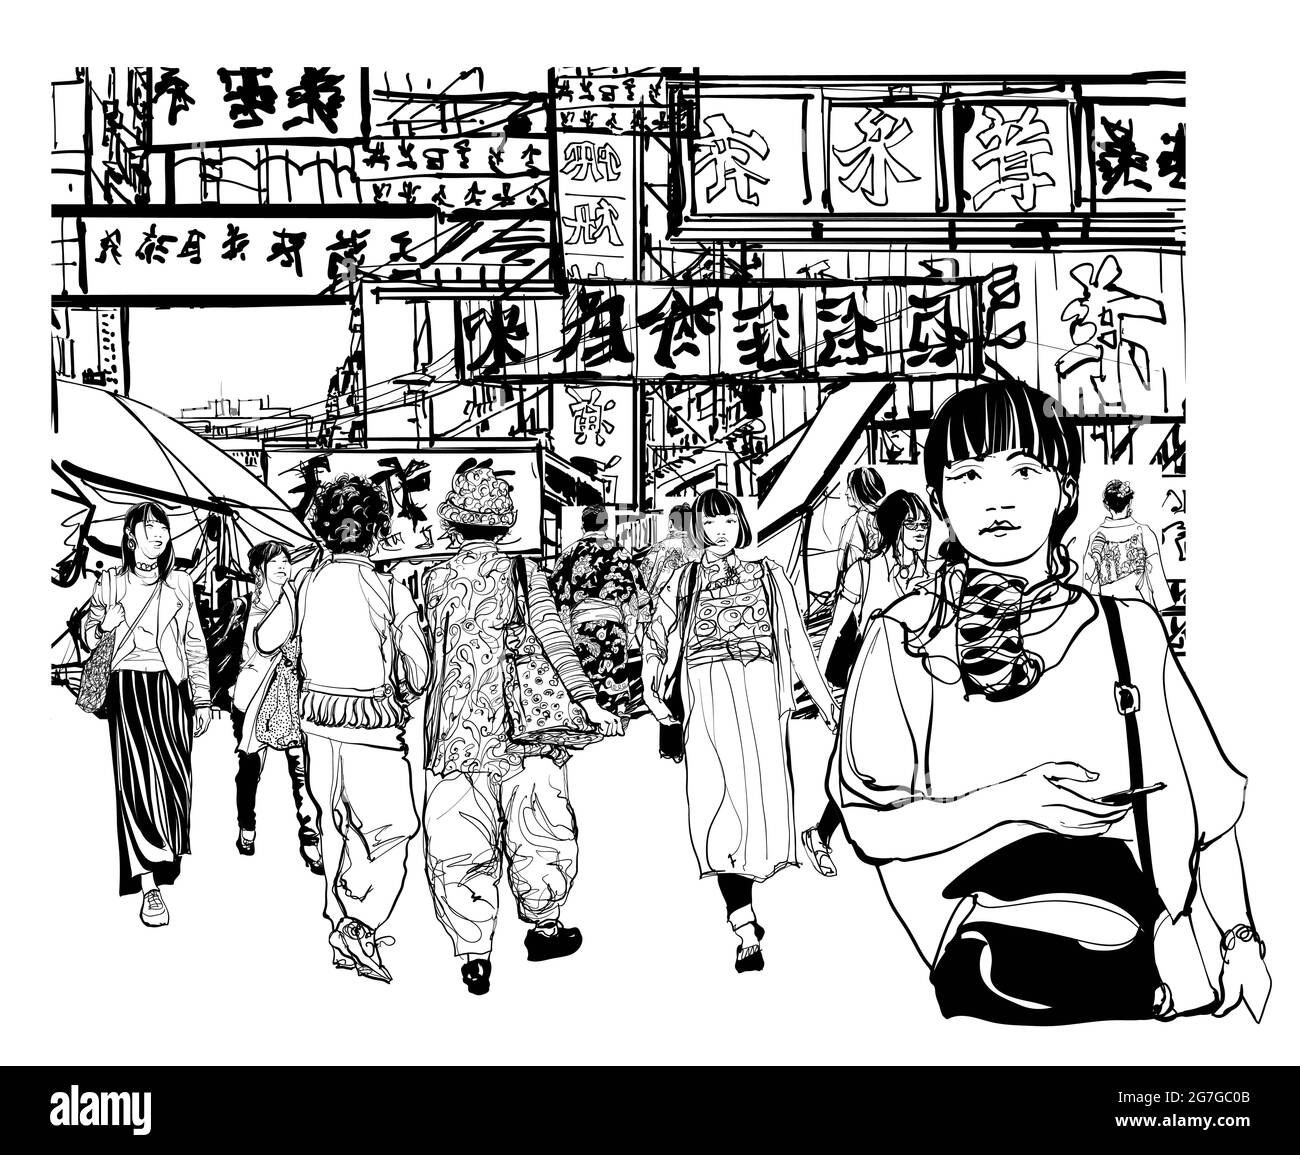 Imaginary cityscape in Japan with people in a street - vector illustration - all characters are ficticious Stock Vector